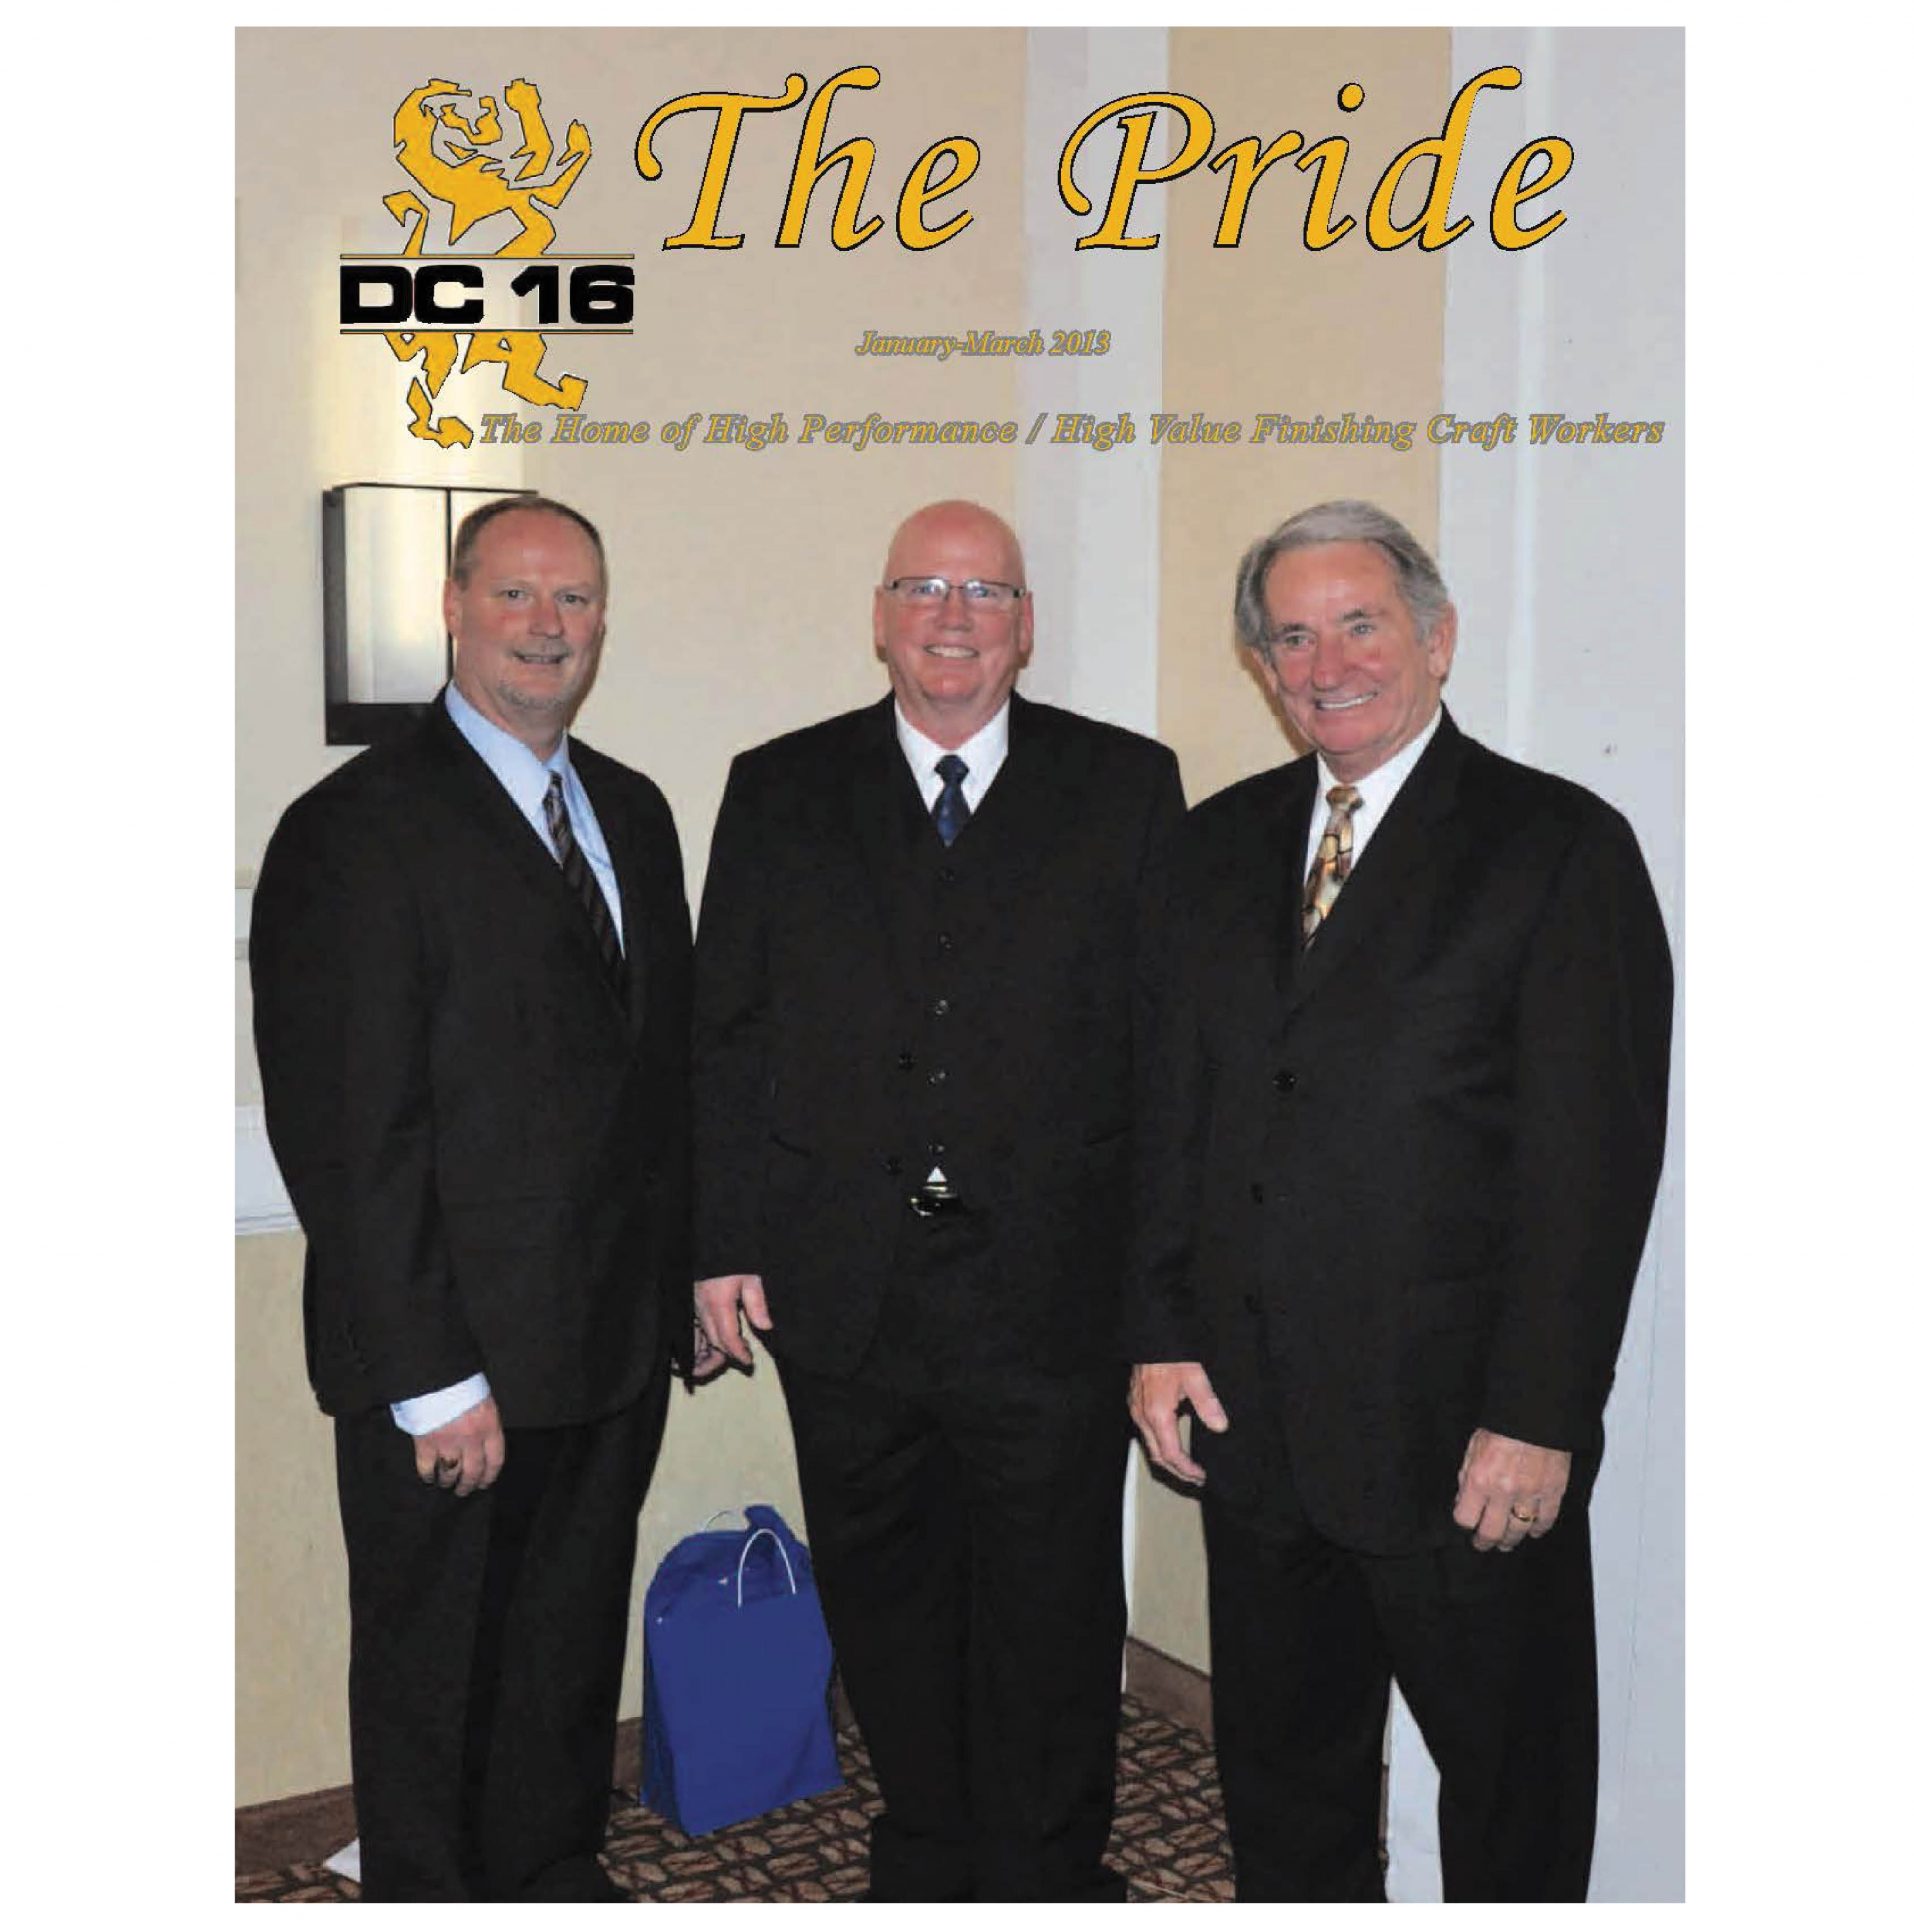 Image from the Gallery: THE PRIDE JANUARY – MARCH 2013